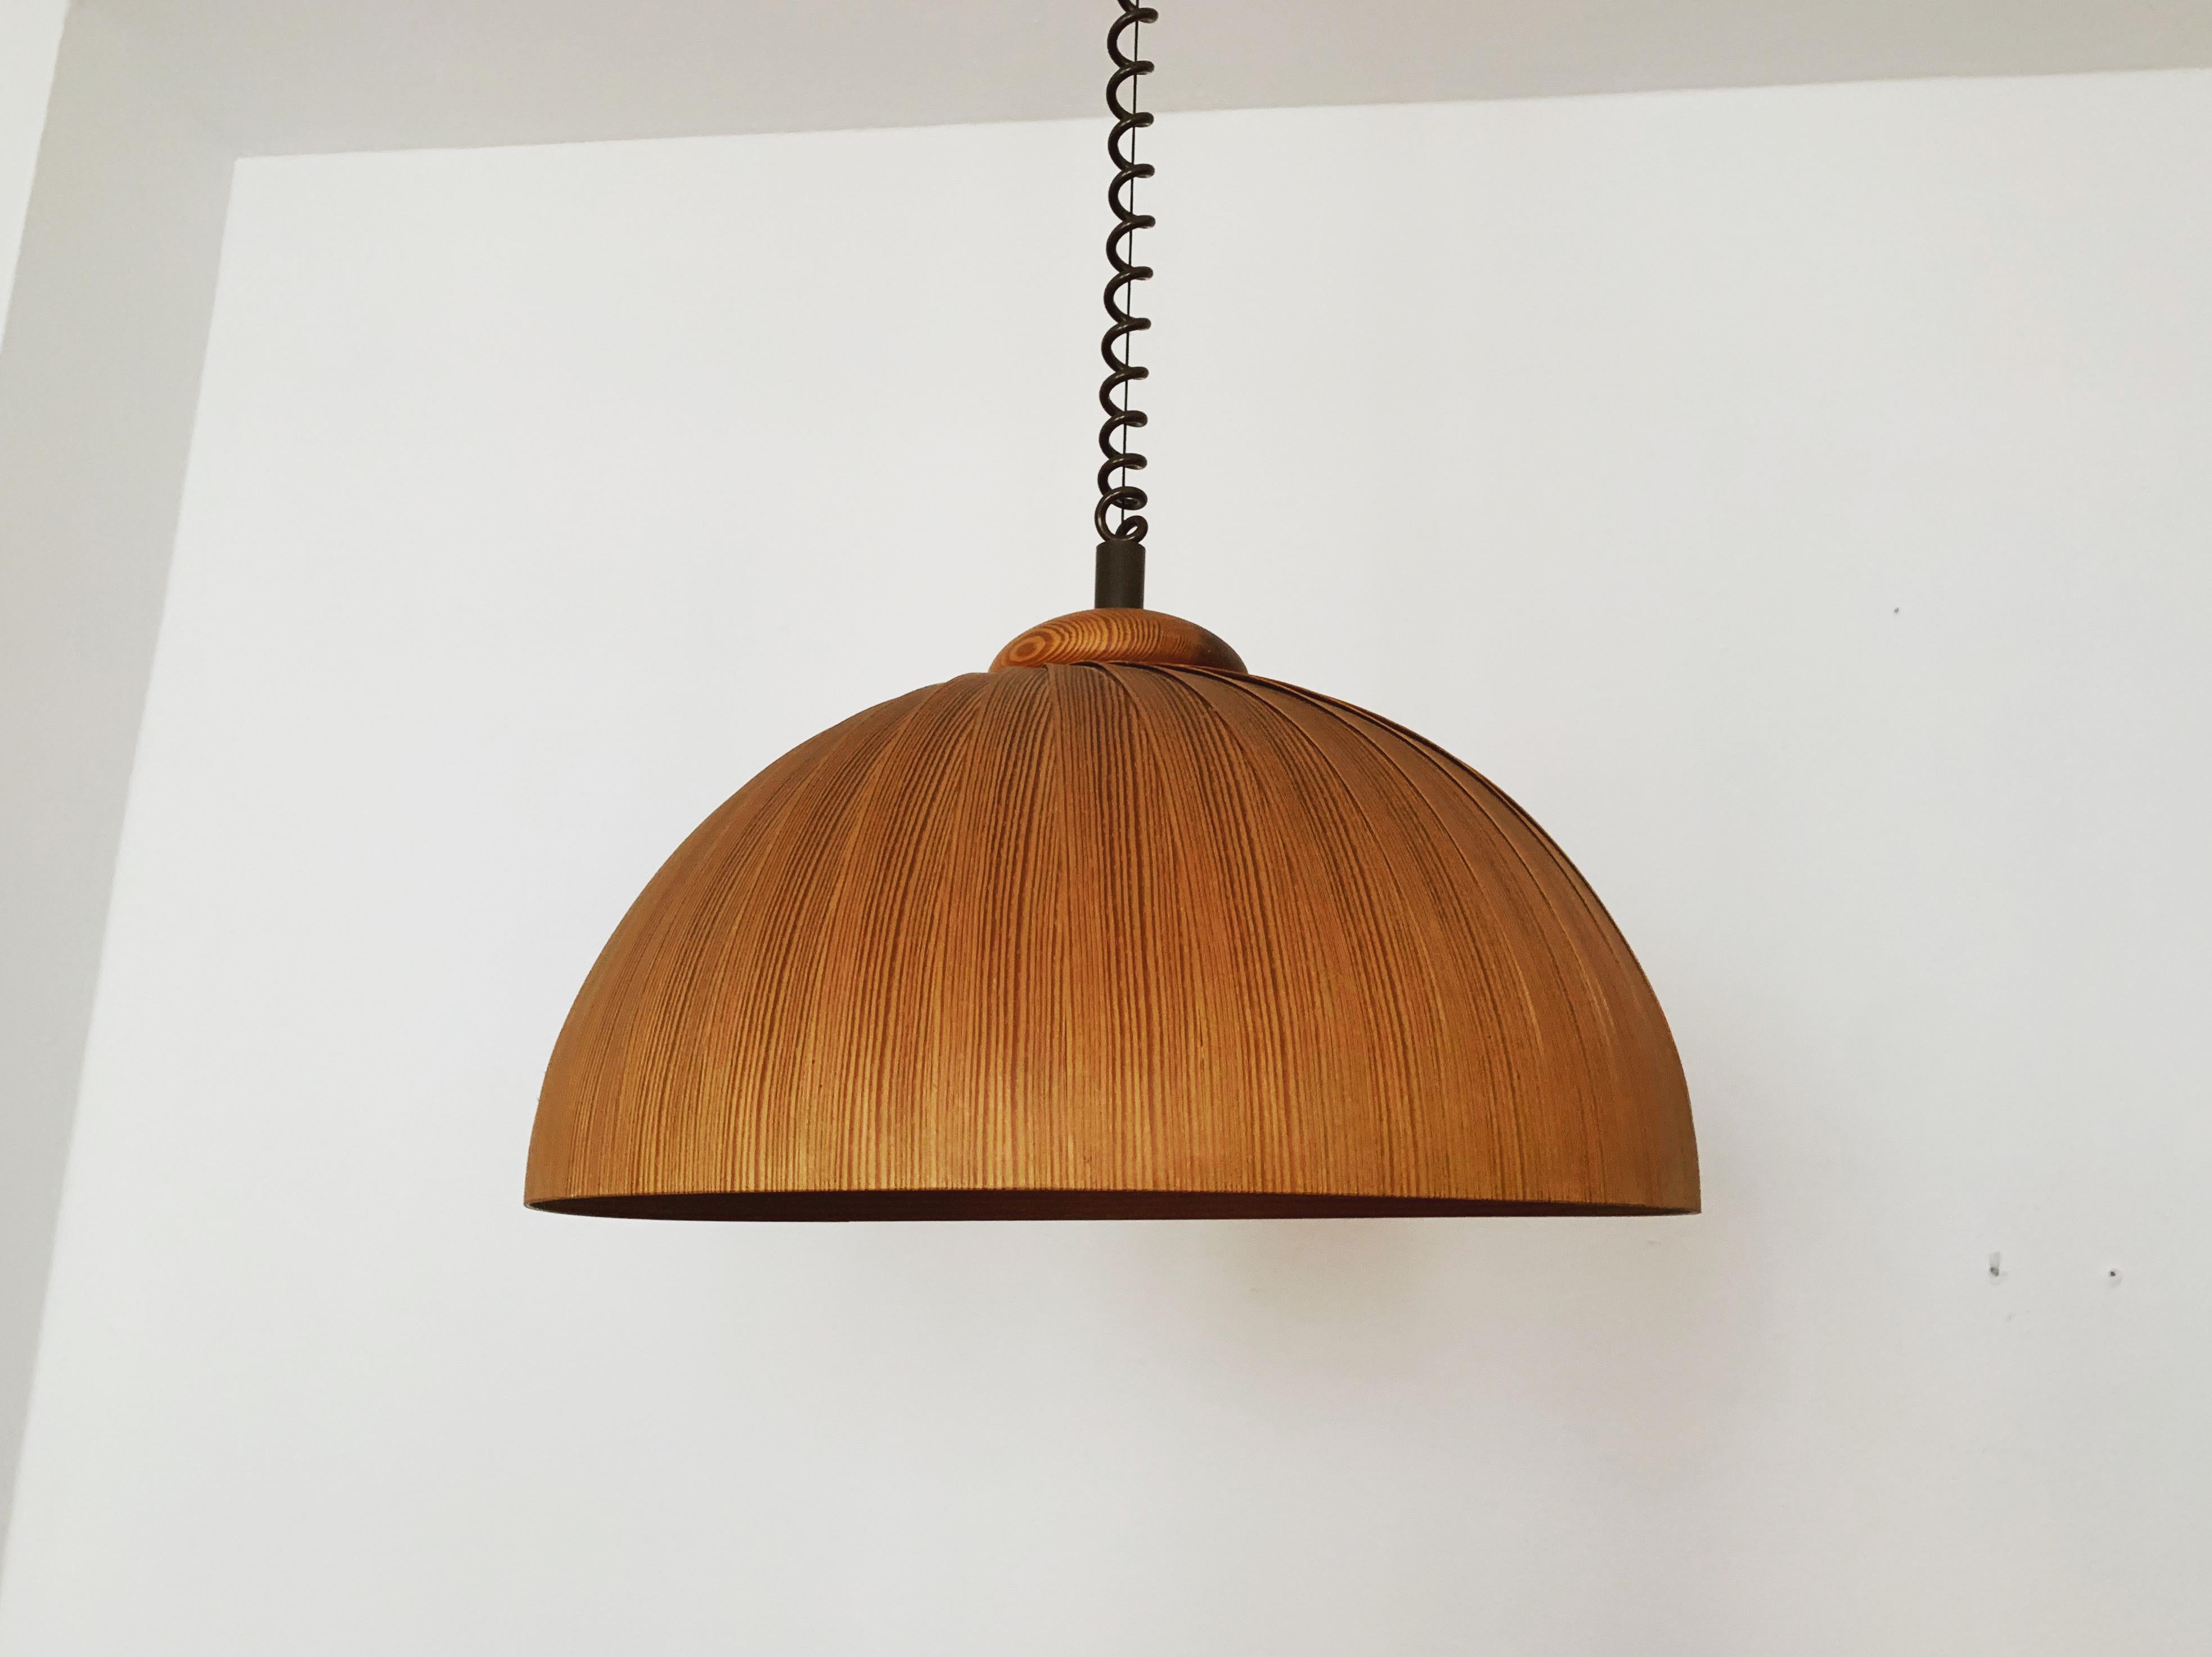 Extraordinarily beautiful wooden pendant lamp from the 1960s.
Loving and high-quality processing.
The design and the material create a very warm and pleasant light.
Infinitely height-adjustable with the lift function.

Condition:

Very good